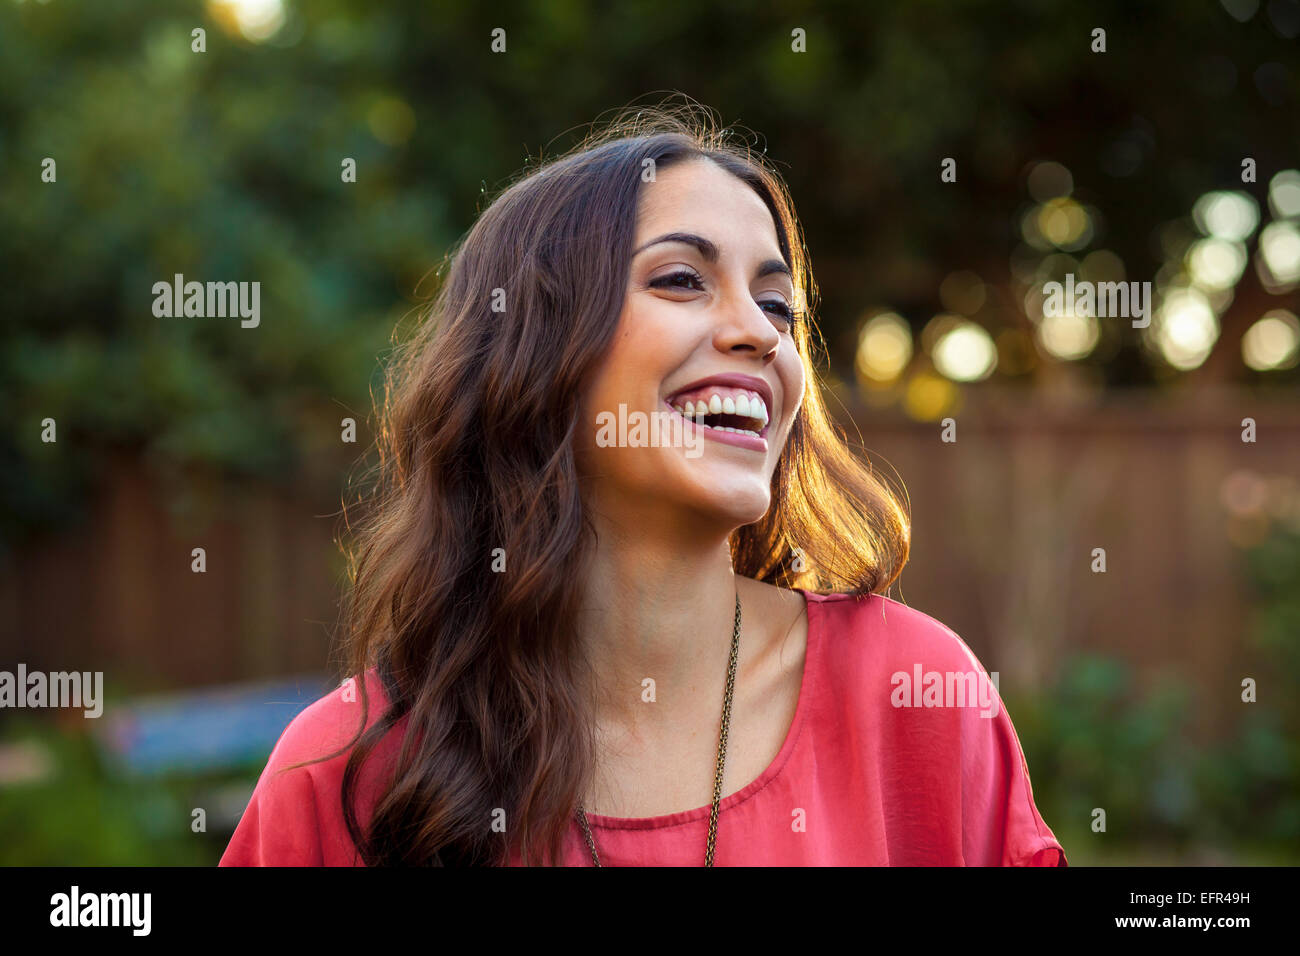 Portrait of young woman with wide smile Stock Photo